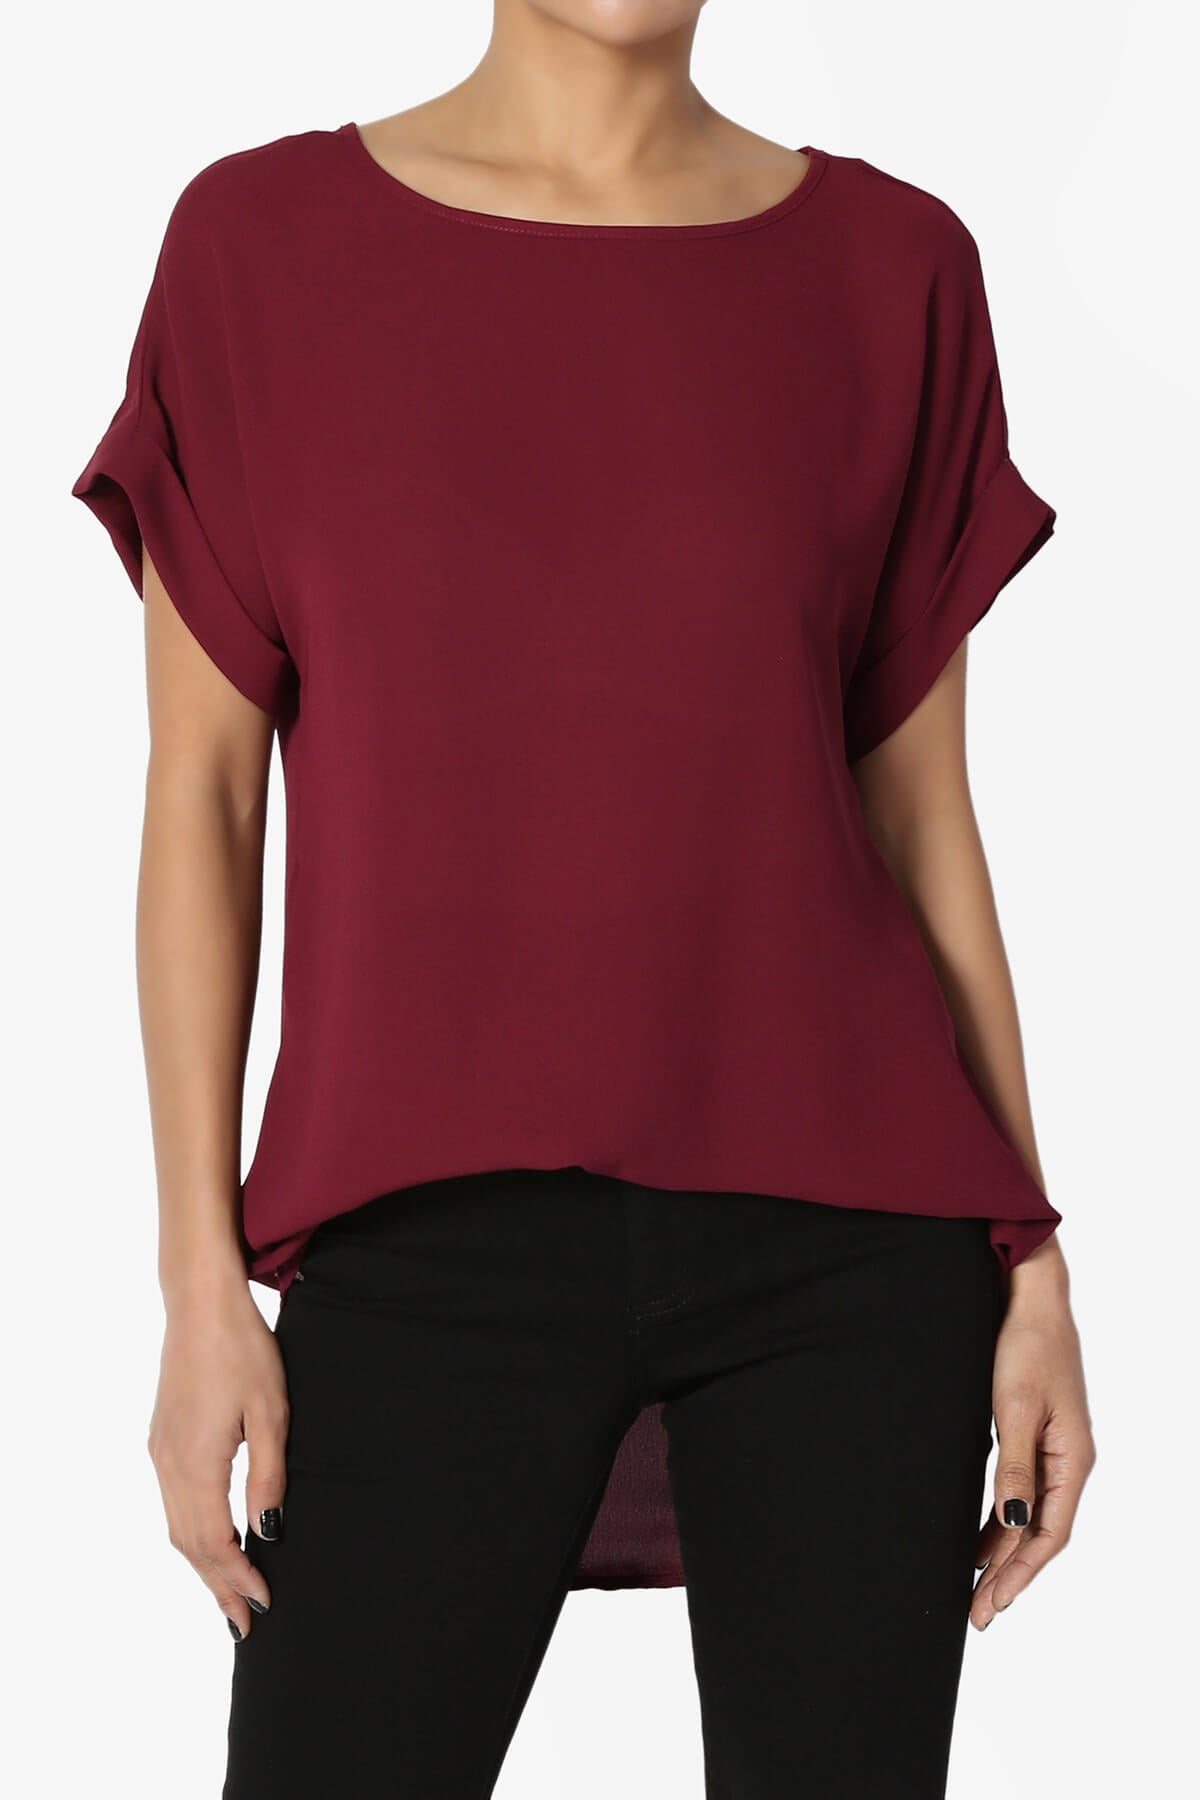 Load image into Gallery viewer, Juliette Boat Neck Chiffon Top BURGUNDY_1
